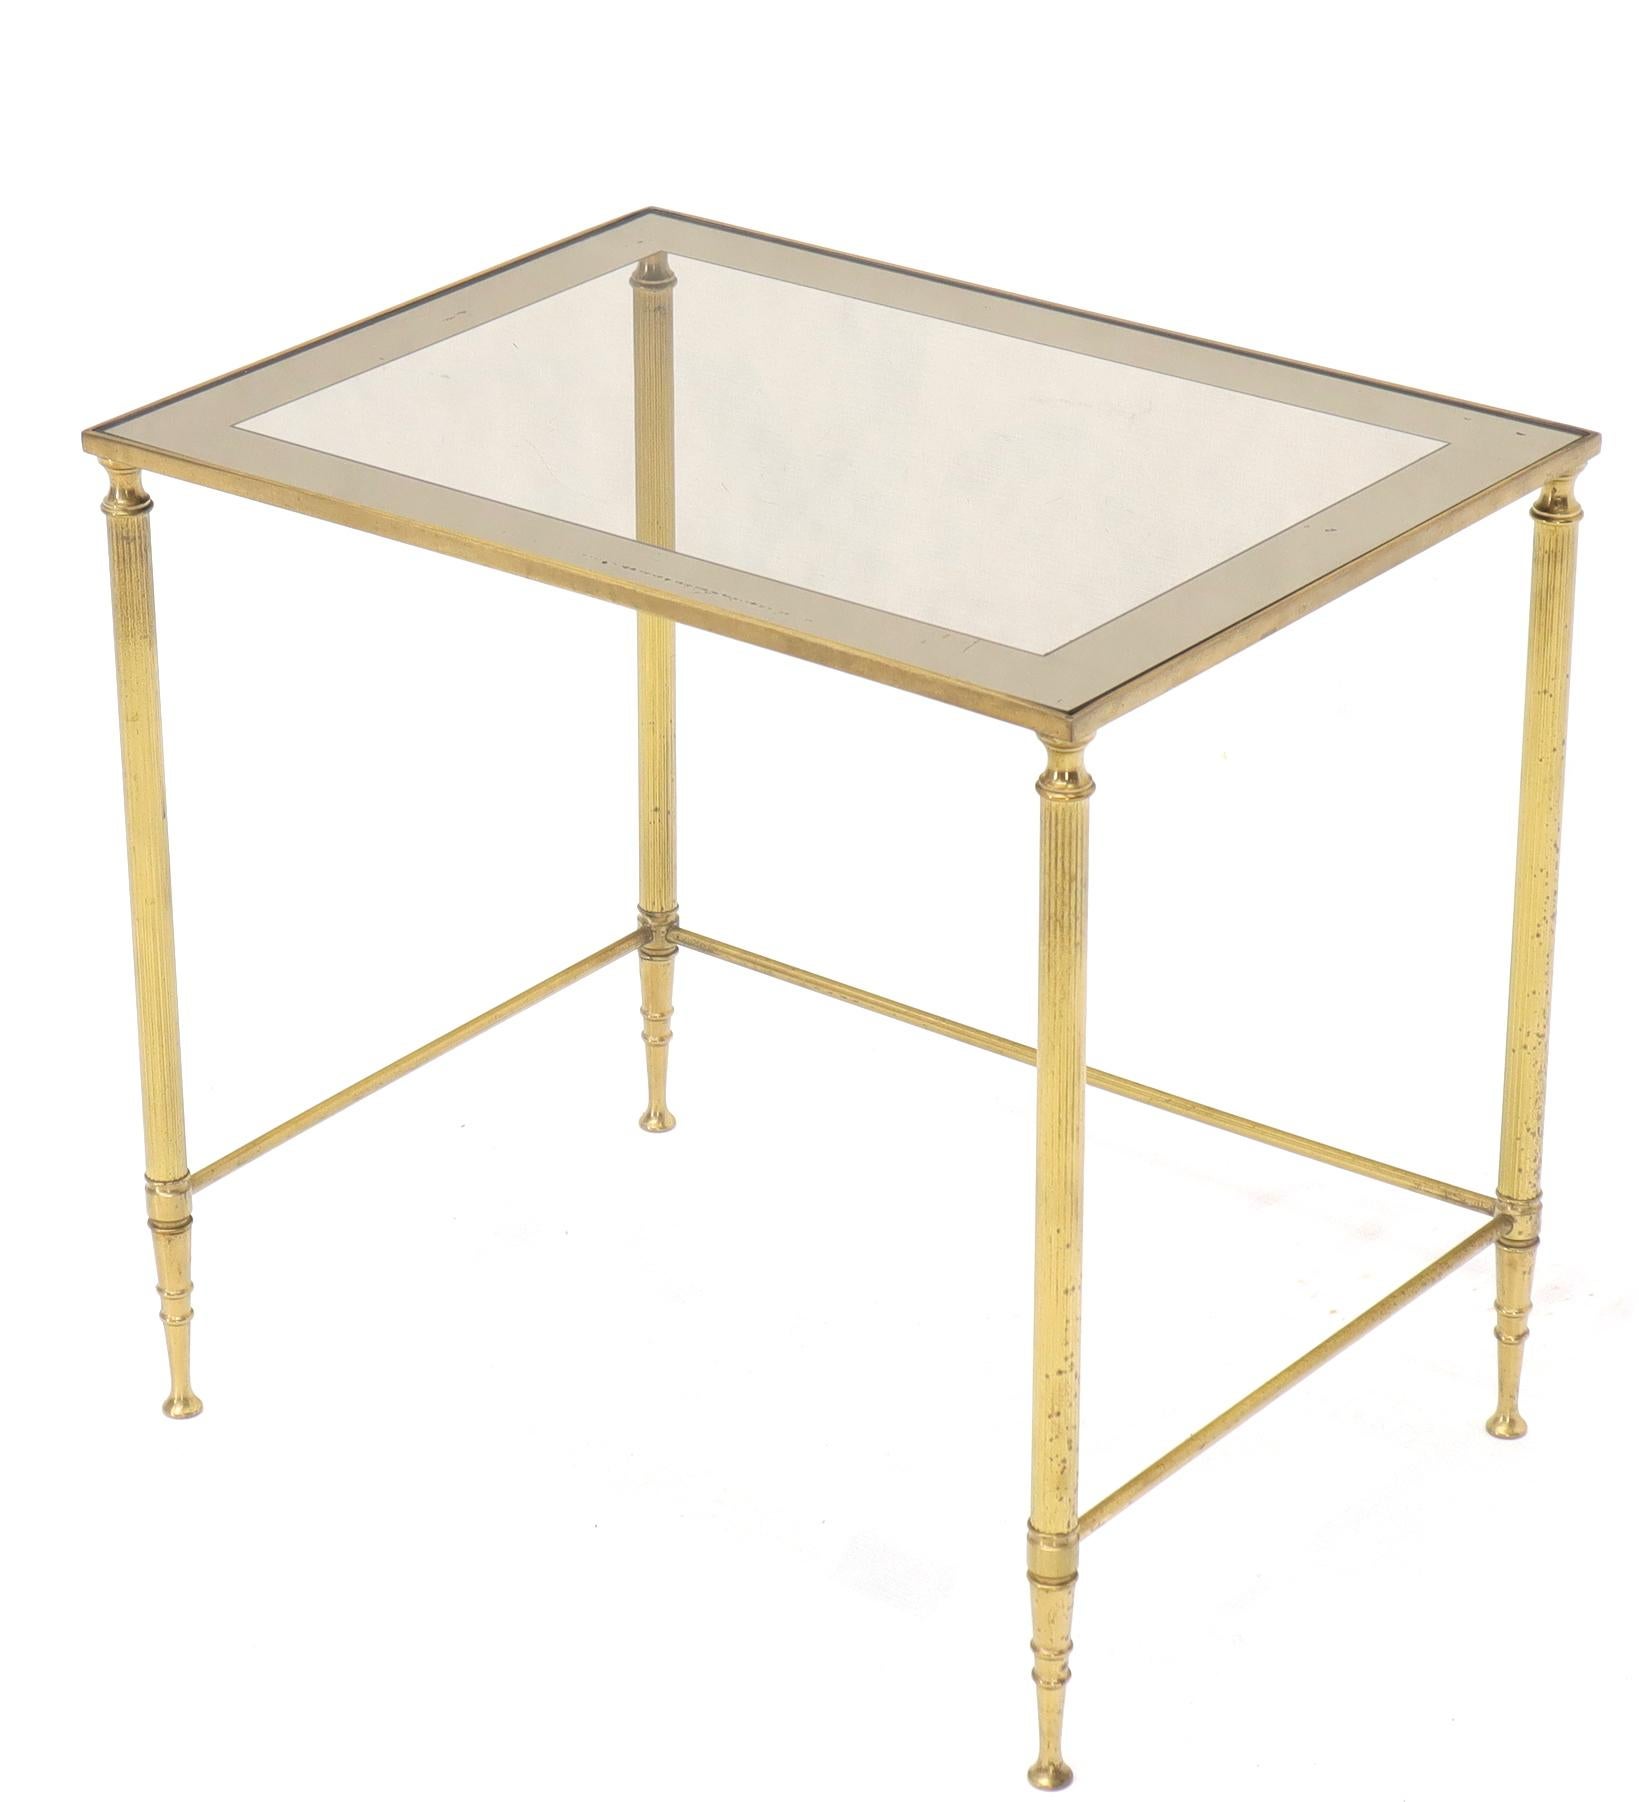 Polished Set of 3 Brass Mirrored Border Glass Tops Nesting Stacking Tables For Sale